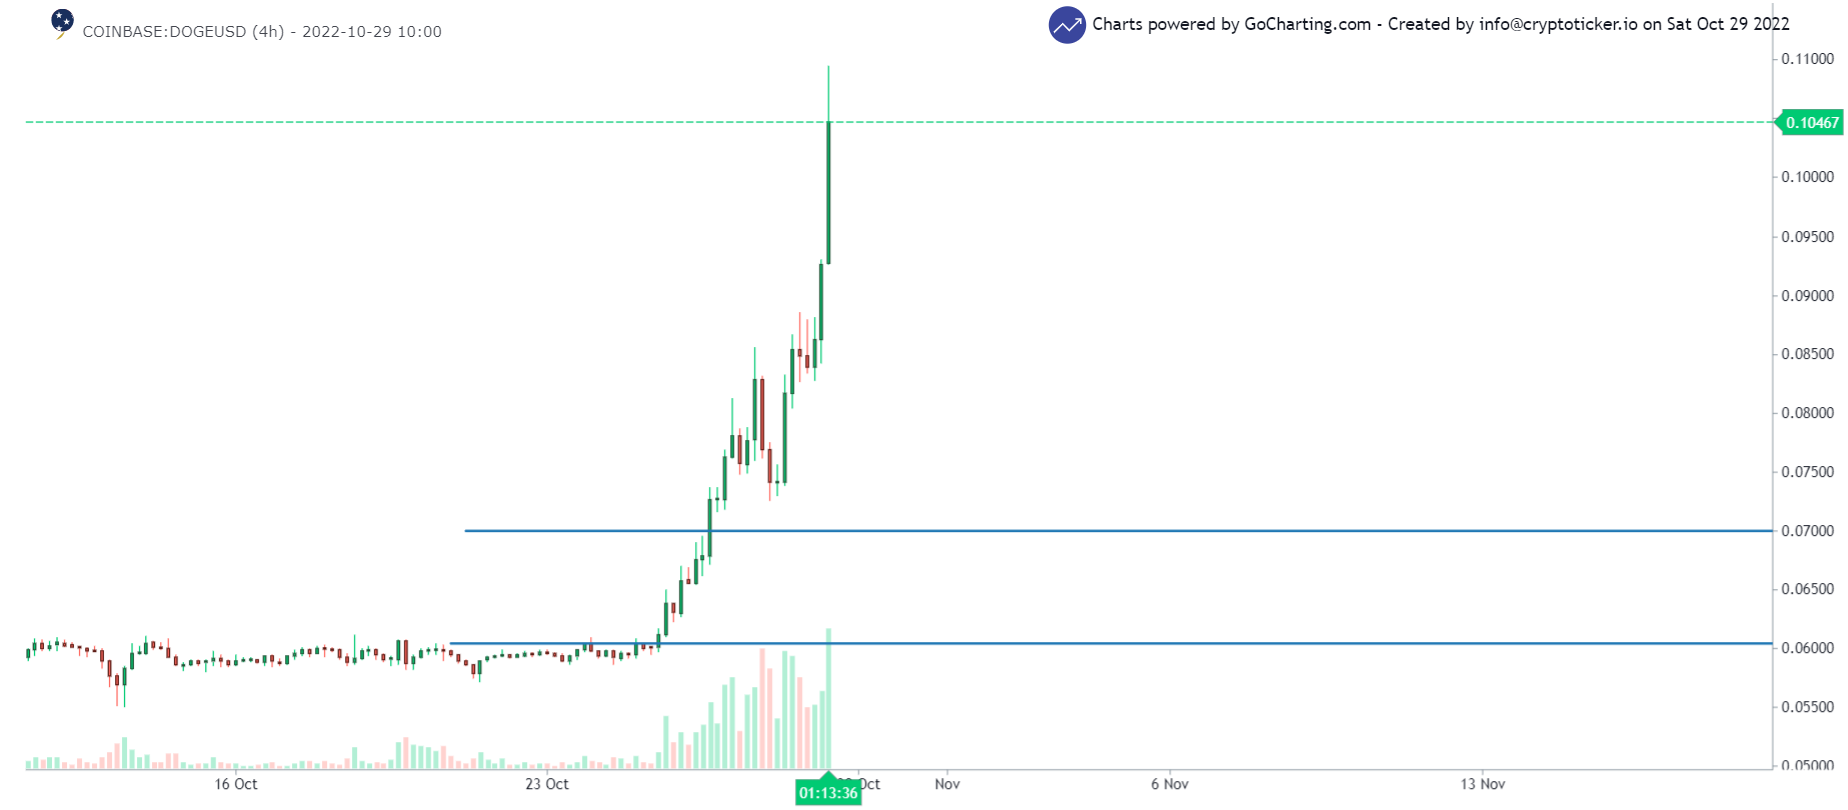 DOGE/USD 4-hours chart showing the price jump of DOGE